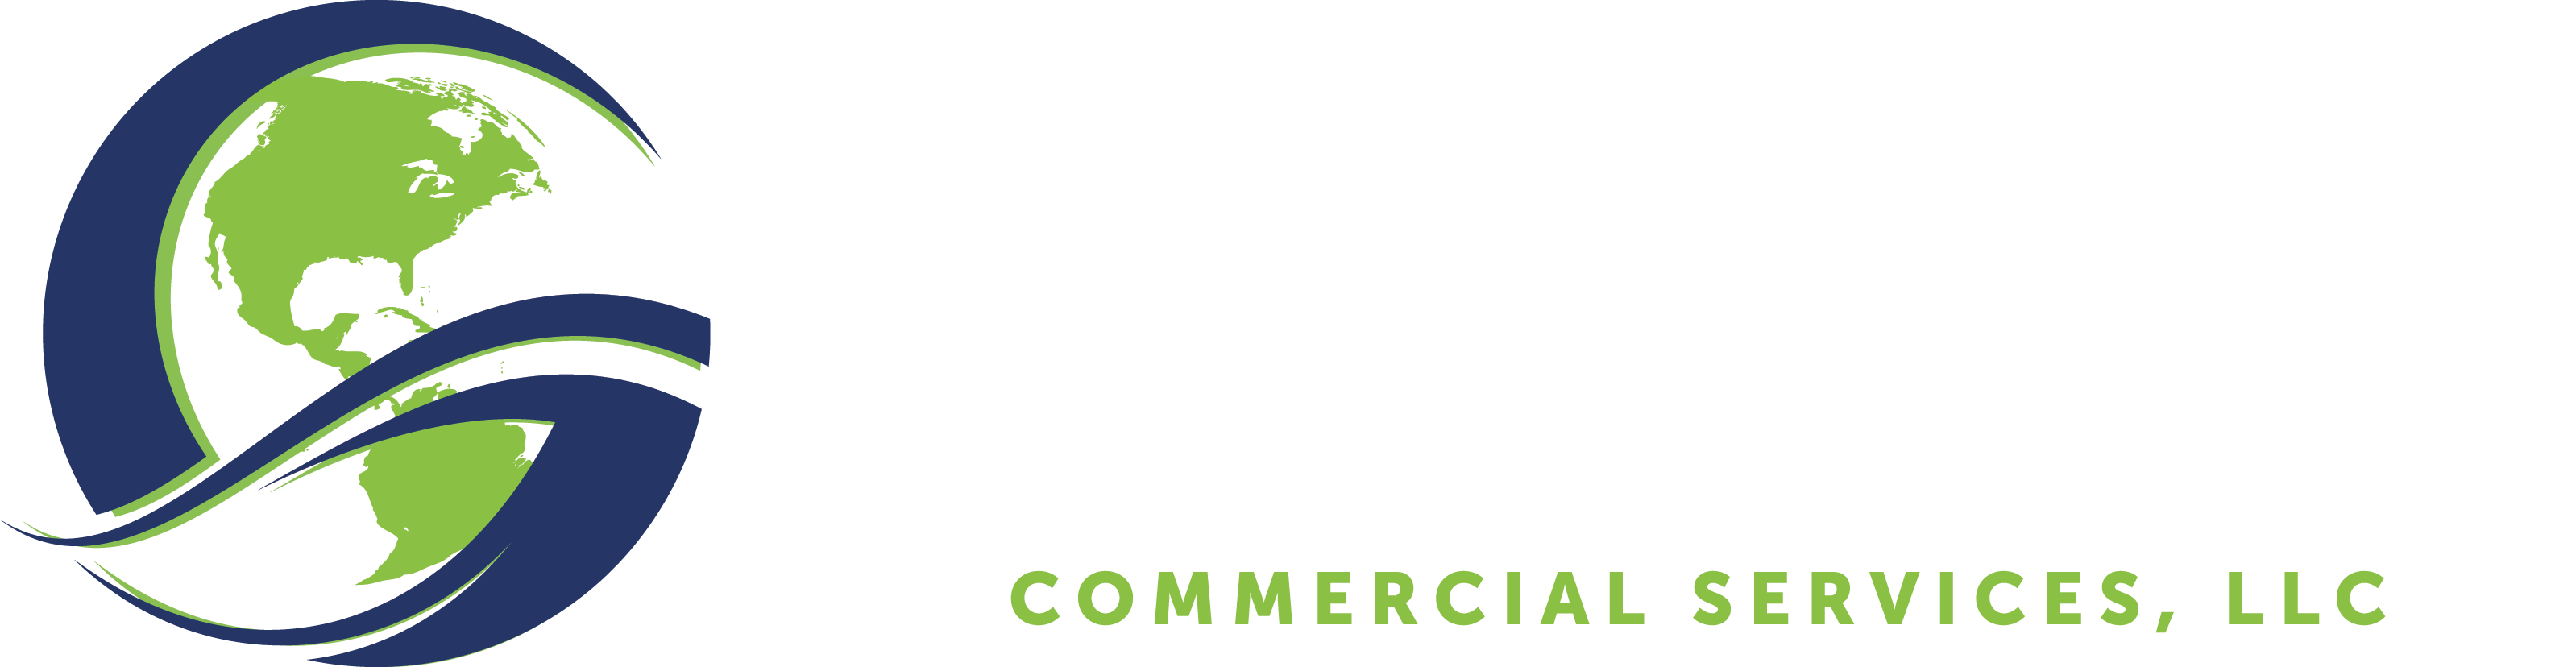 Gulfstream Commercial Services, LLC